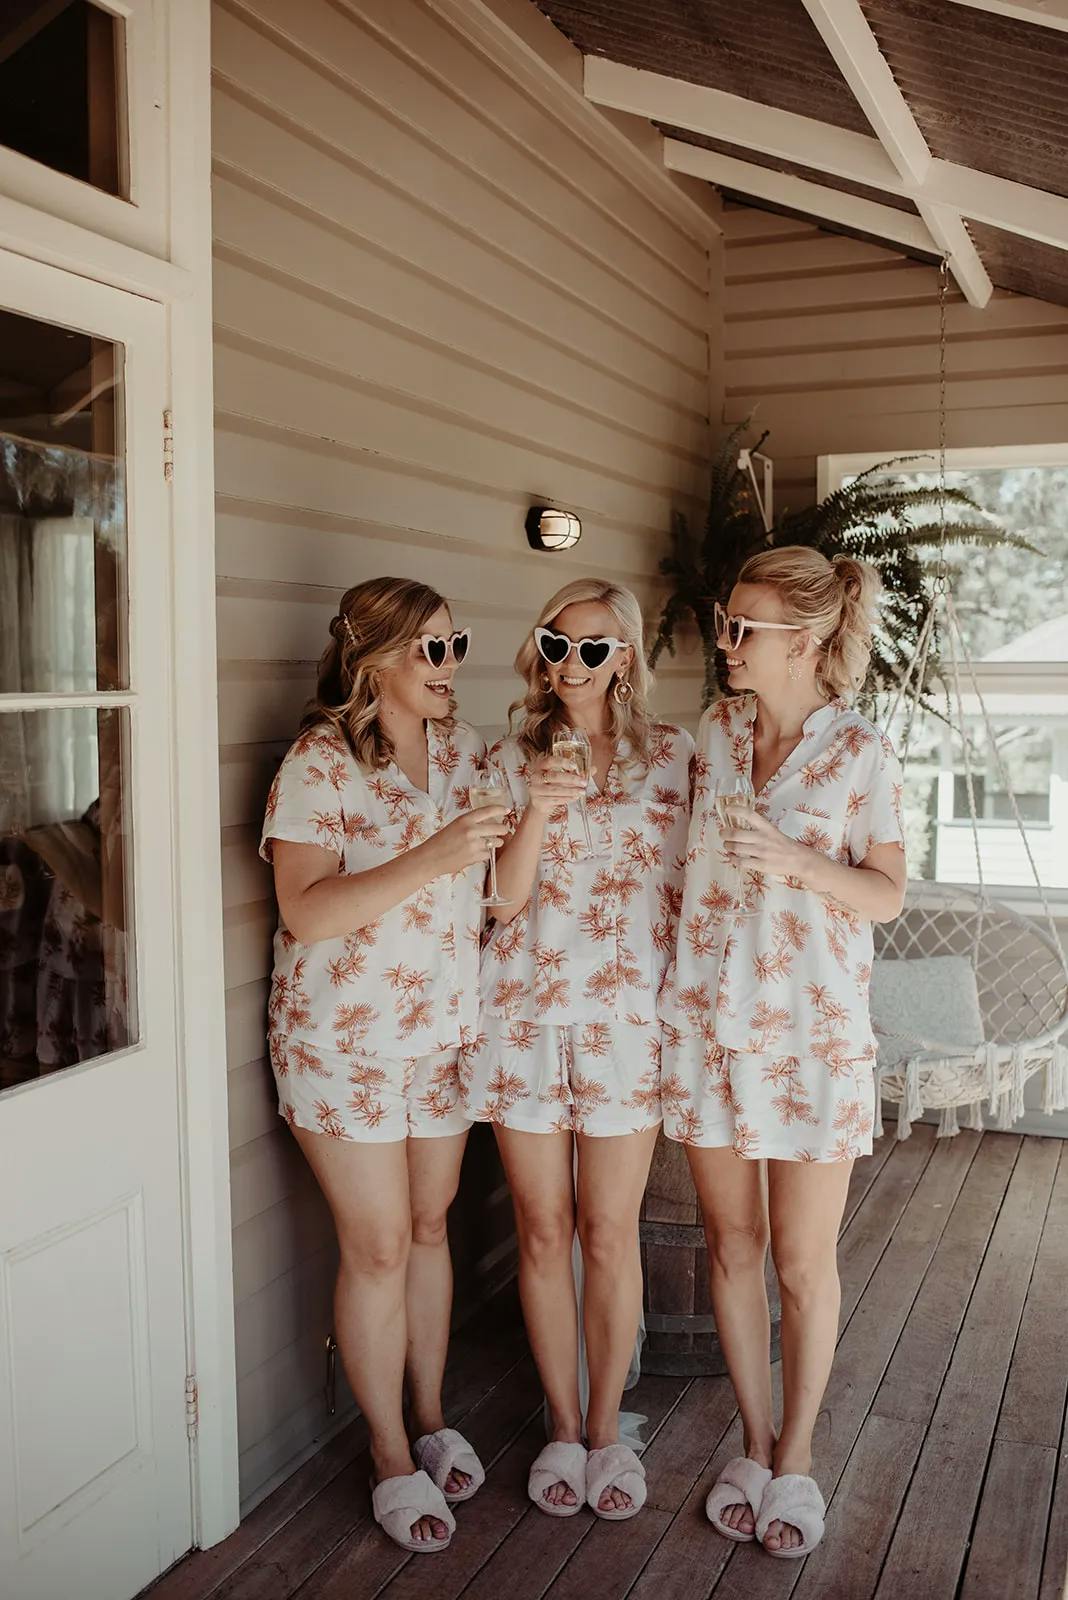 Three women stand outside on a wooden porch, wearing matching pajamas with a white and pink floral pattern. They are wearing sunglasses and holding glasses of drinks, smiling and talking to each other. There is a hanging chair and potted plant in the background.